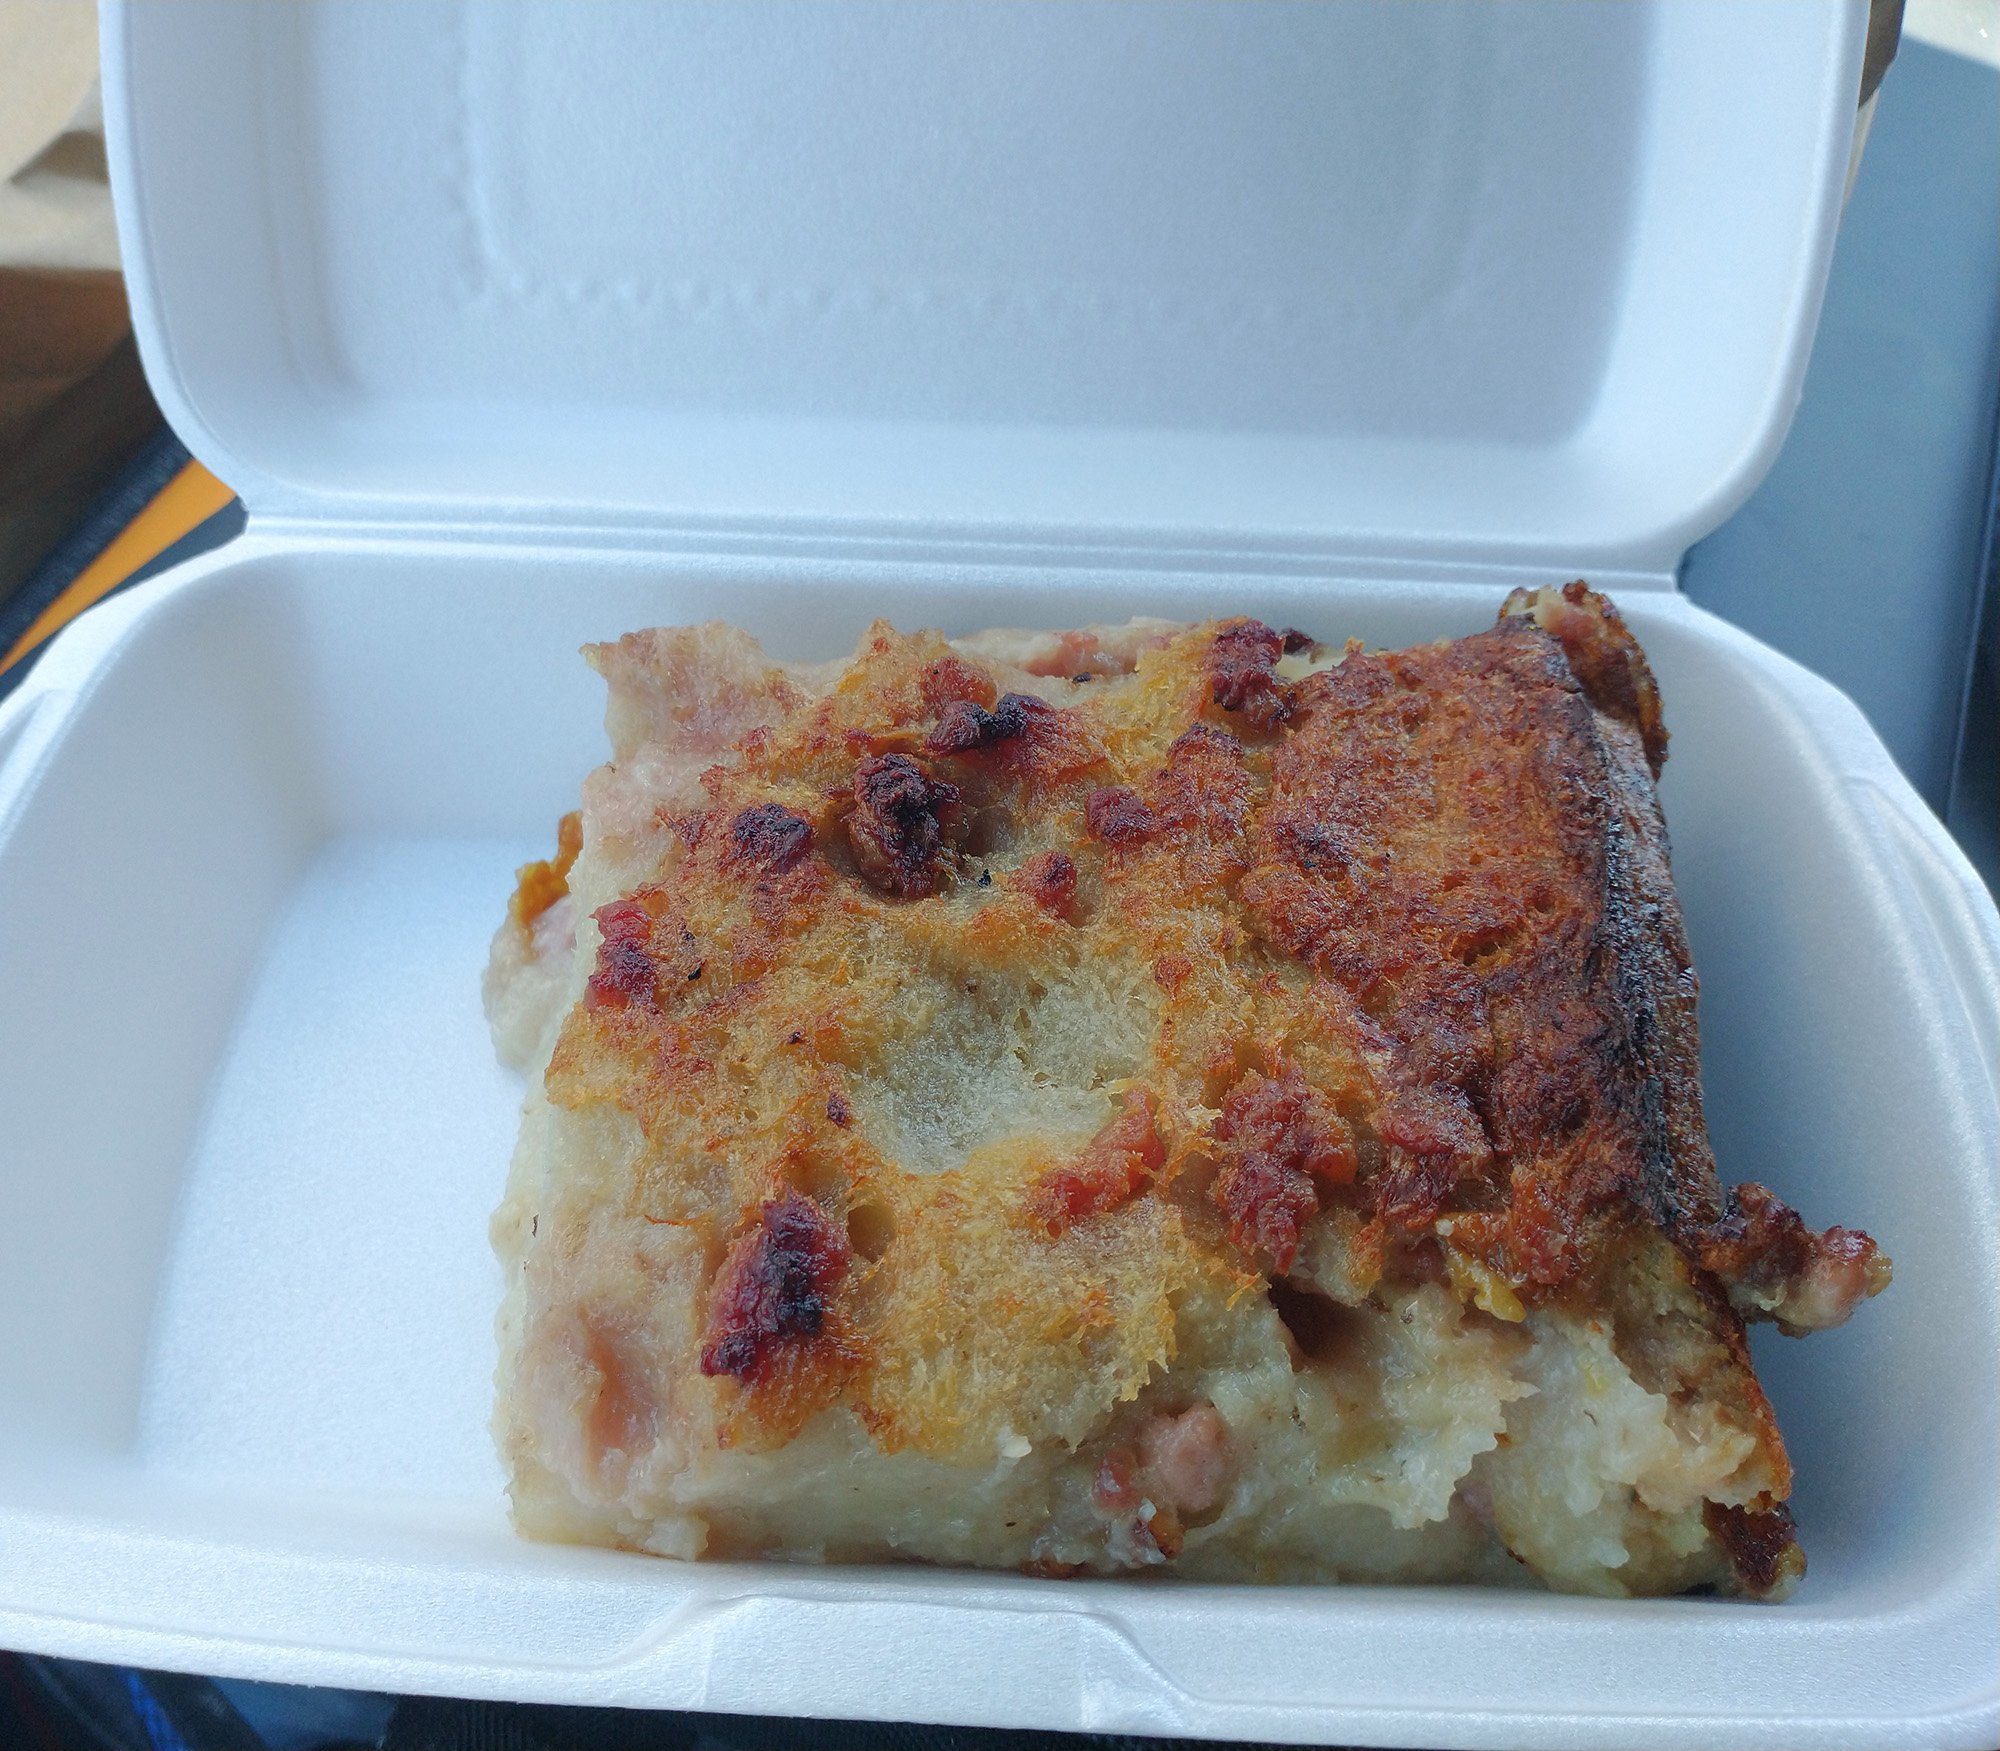 Started my day with traditional Acadian cuisine from a little hole in the wall restaurant. This is called "Rappie Pie"